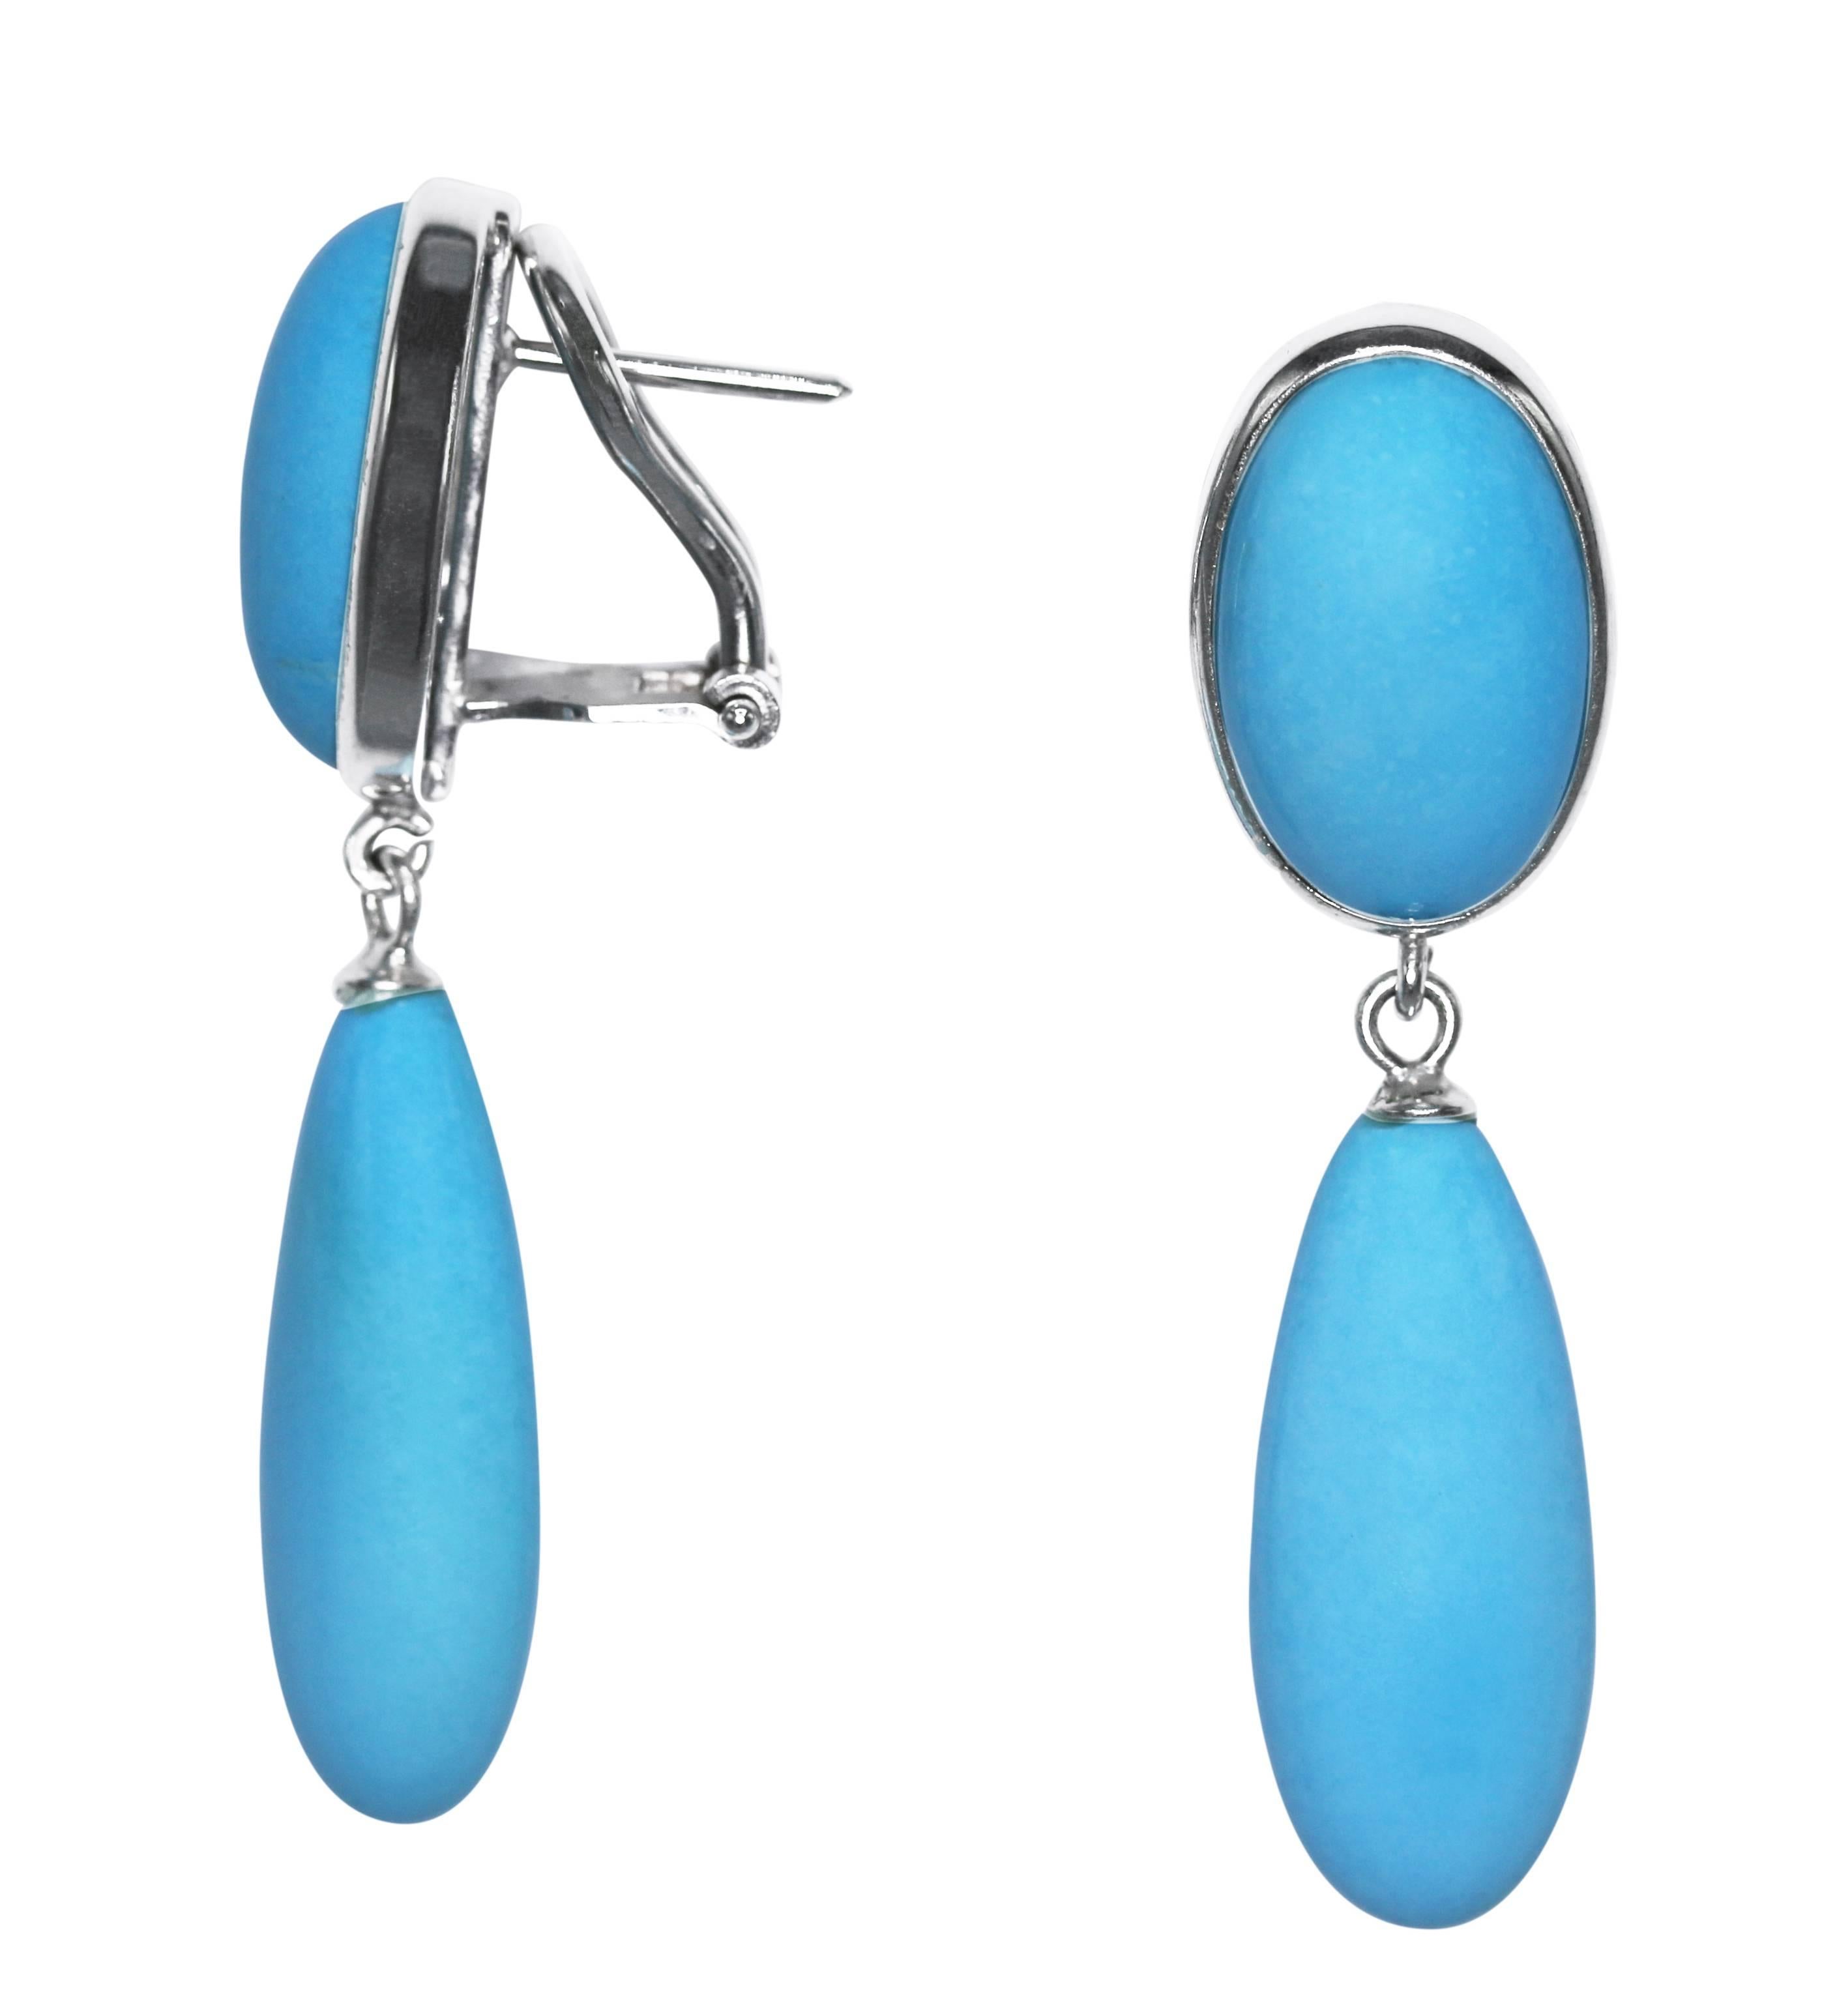 Pair of natural turquoise and 18 karat white gold earlcips, designed with oval tops set with oval cabochon turquoise segments, supporting articulated drops of turquoise, gross weight 12.6 grams, measuring 1 3/4 by 1/2 inches, with Italian gold